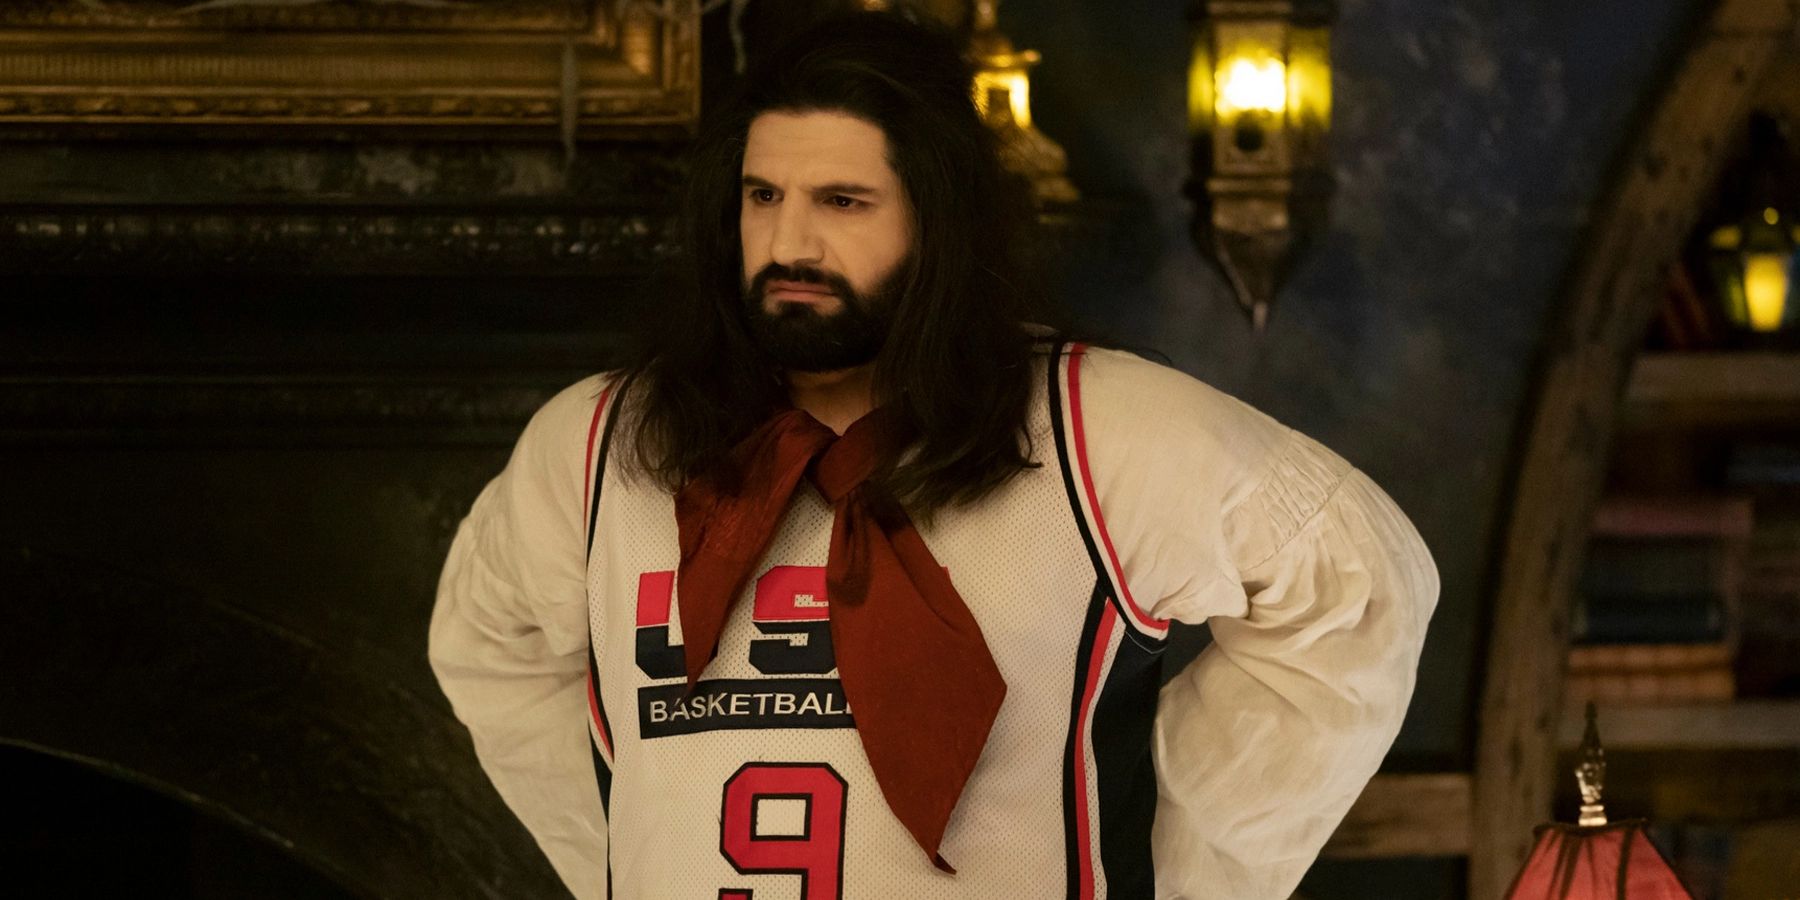 Nandor wearing a basketball jersey as he puts his arms on his waist in What We Do in the Shadows.